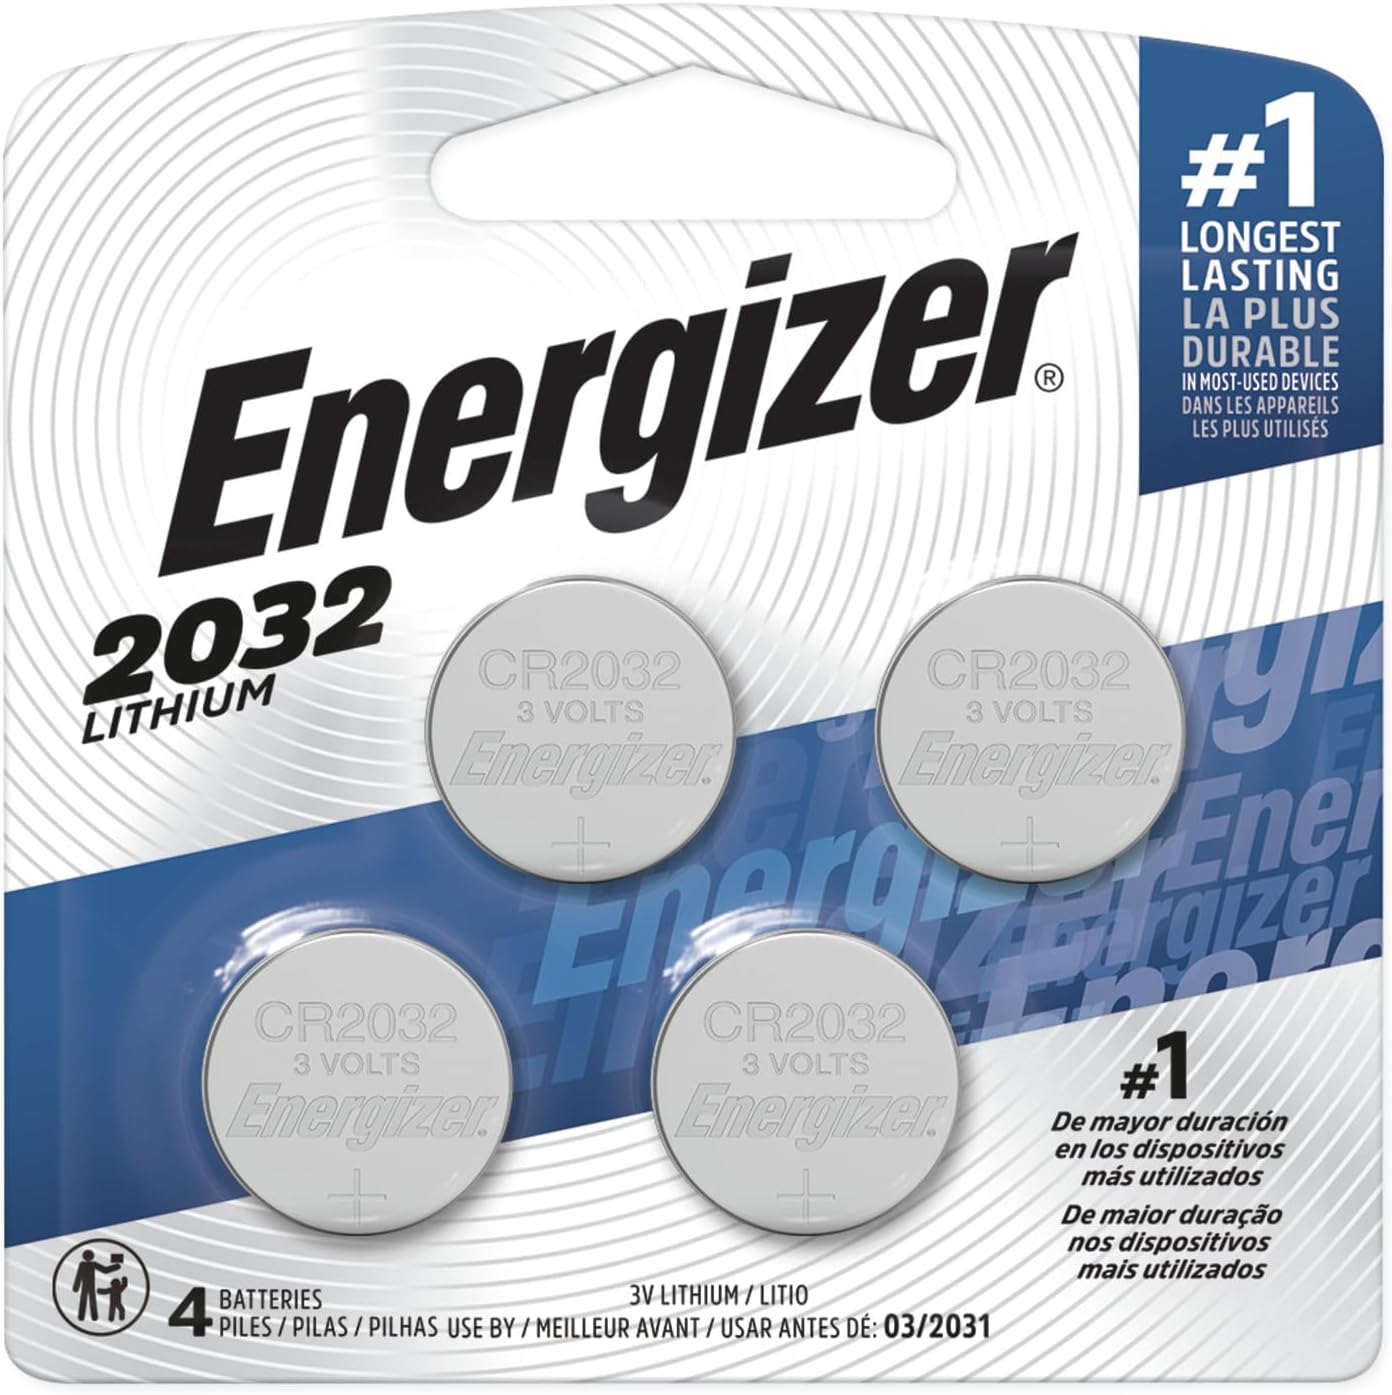 Energizer CR2032 Batteries, 3V Lithium Coin Cell 2032 Watch Battery